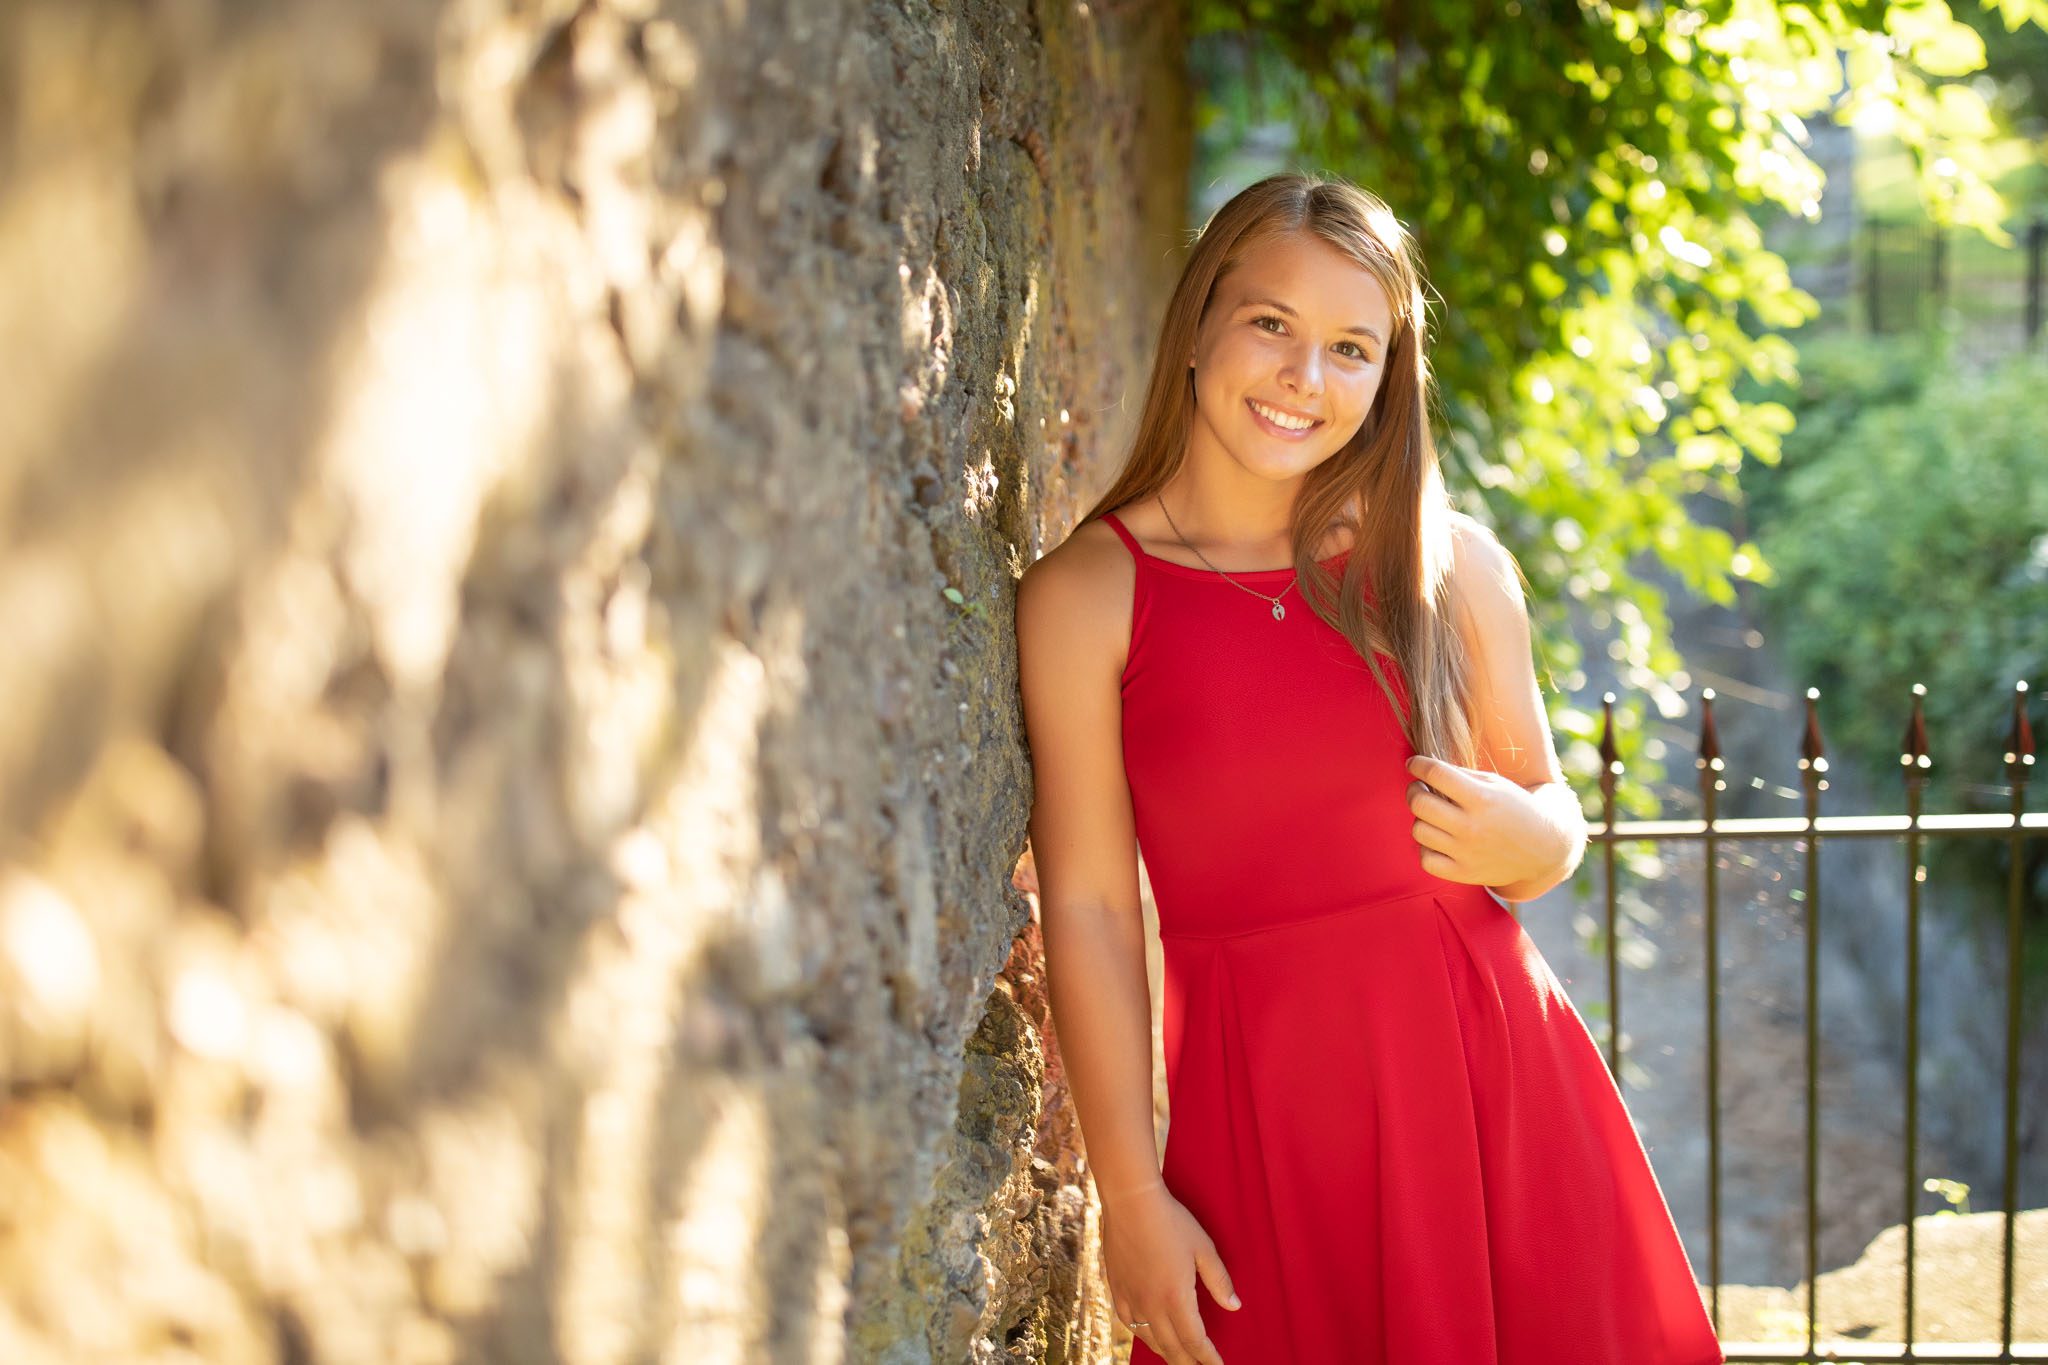 Summer Senior portrait of a young woman in a casual red dress at sunset while leaning against a stone wall in Massachusetts